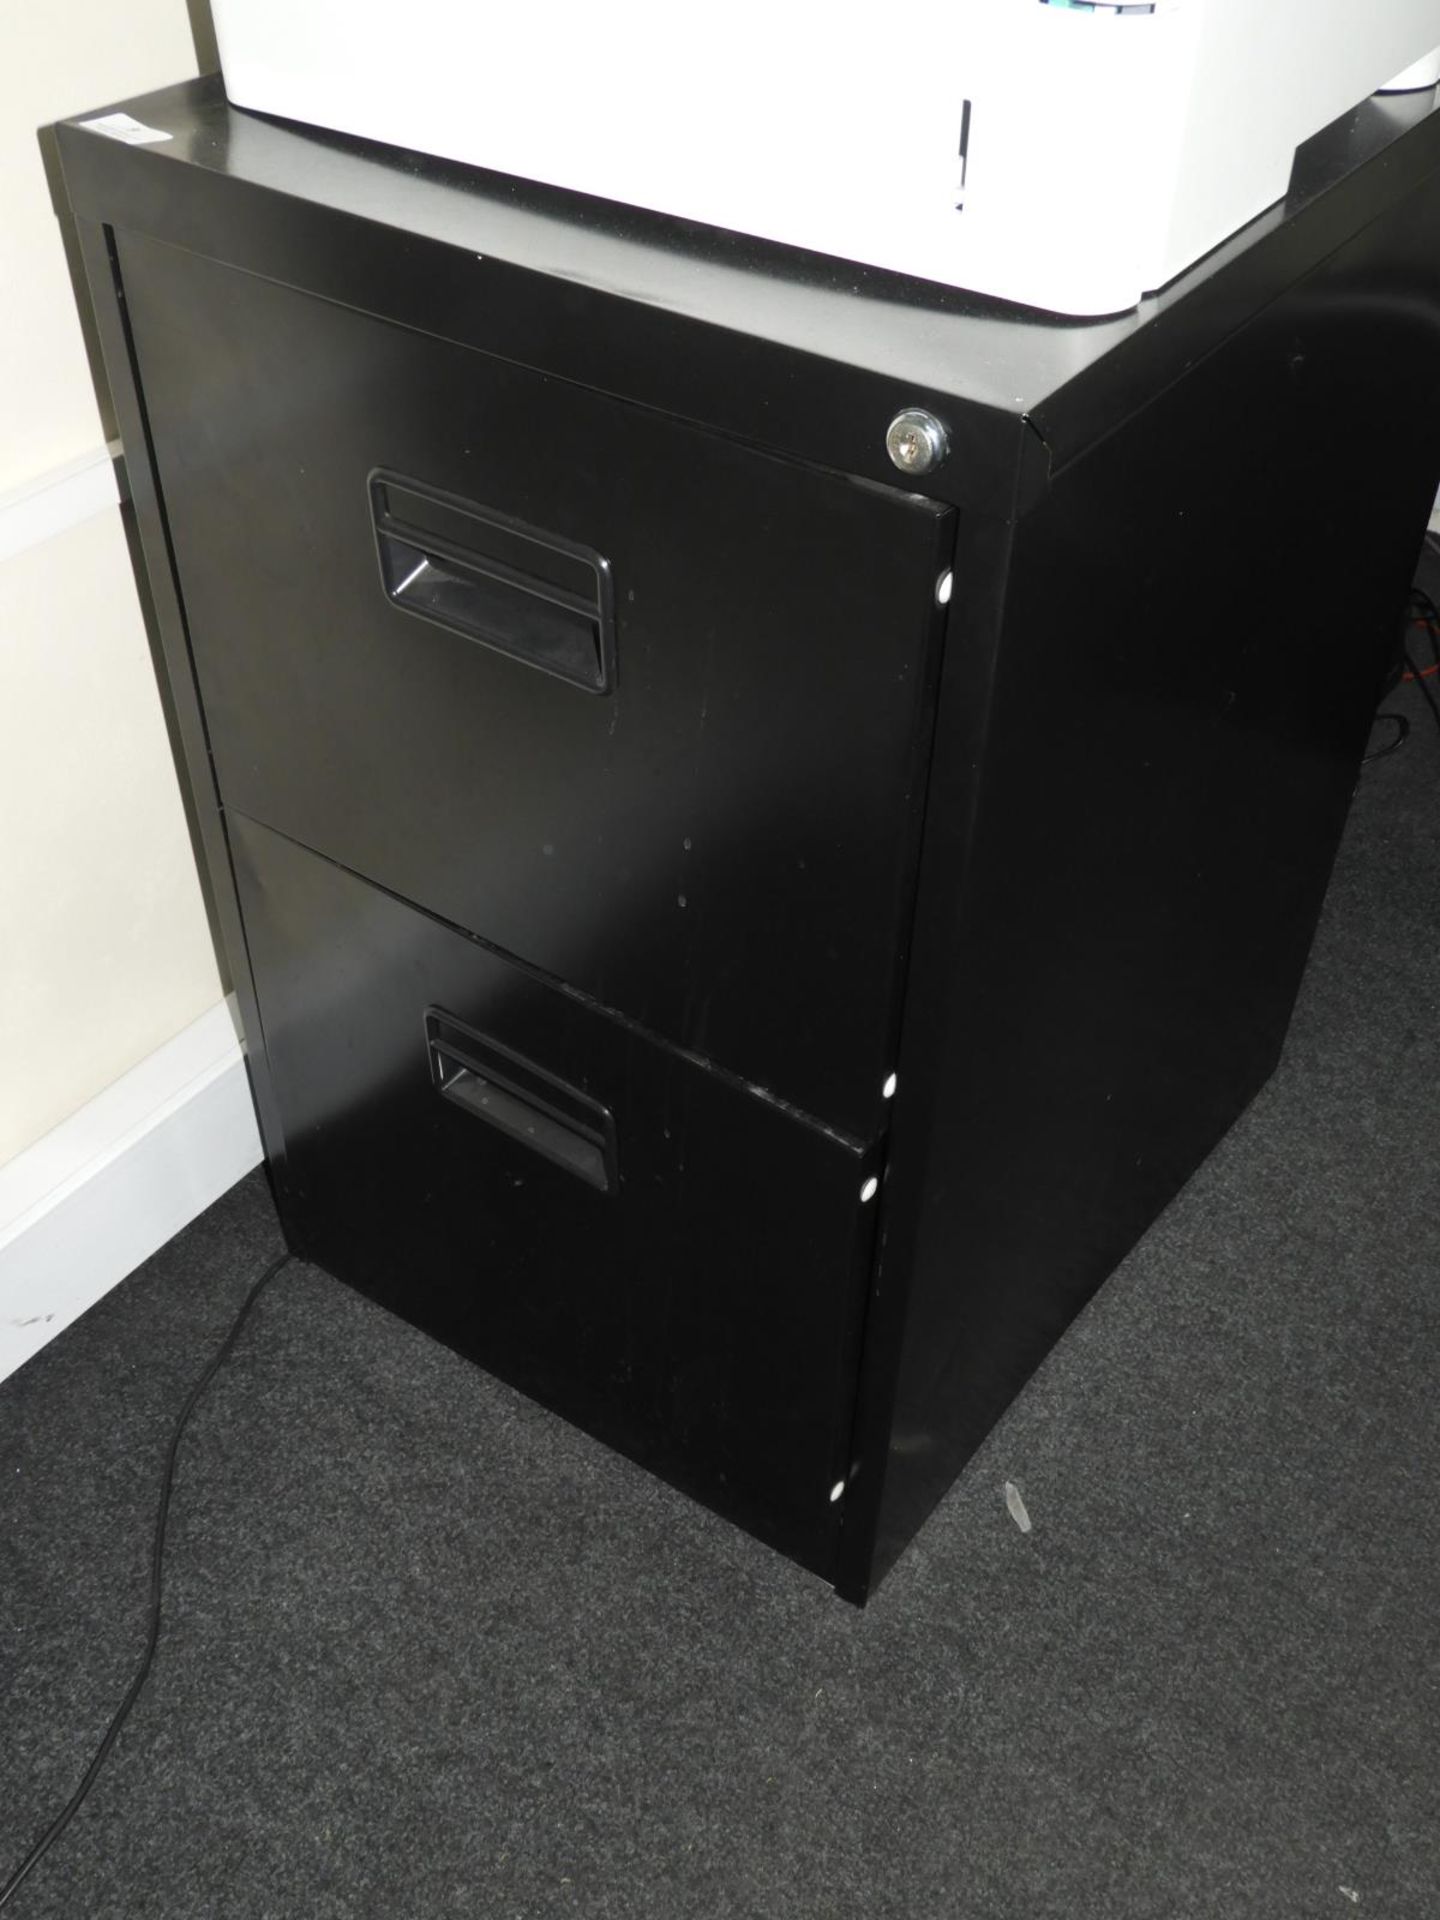 *Two Drawer Foolscap Filing Cabinet - Black